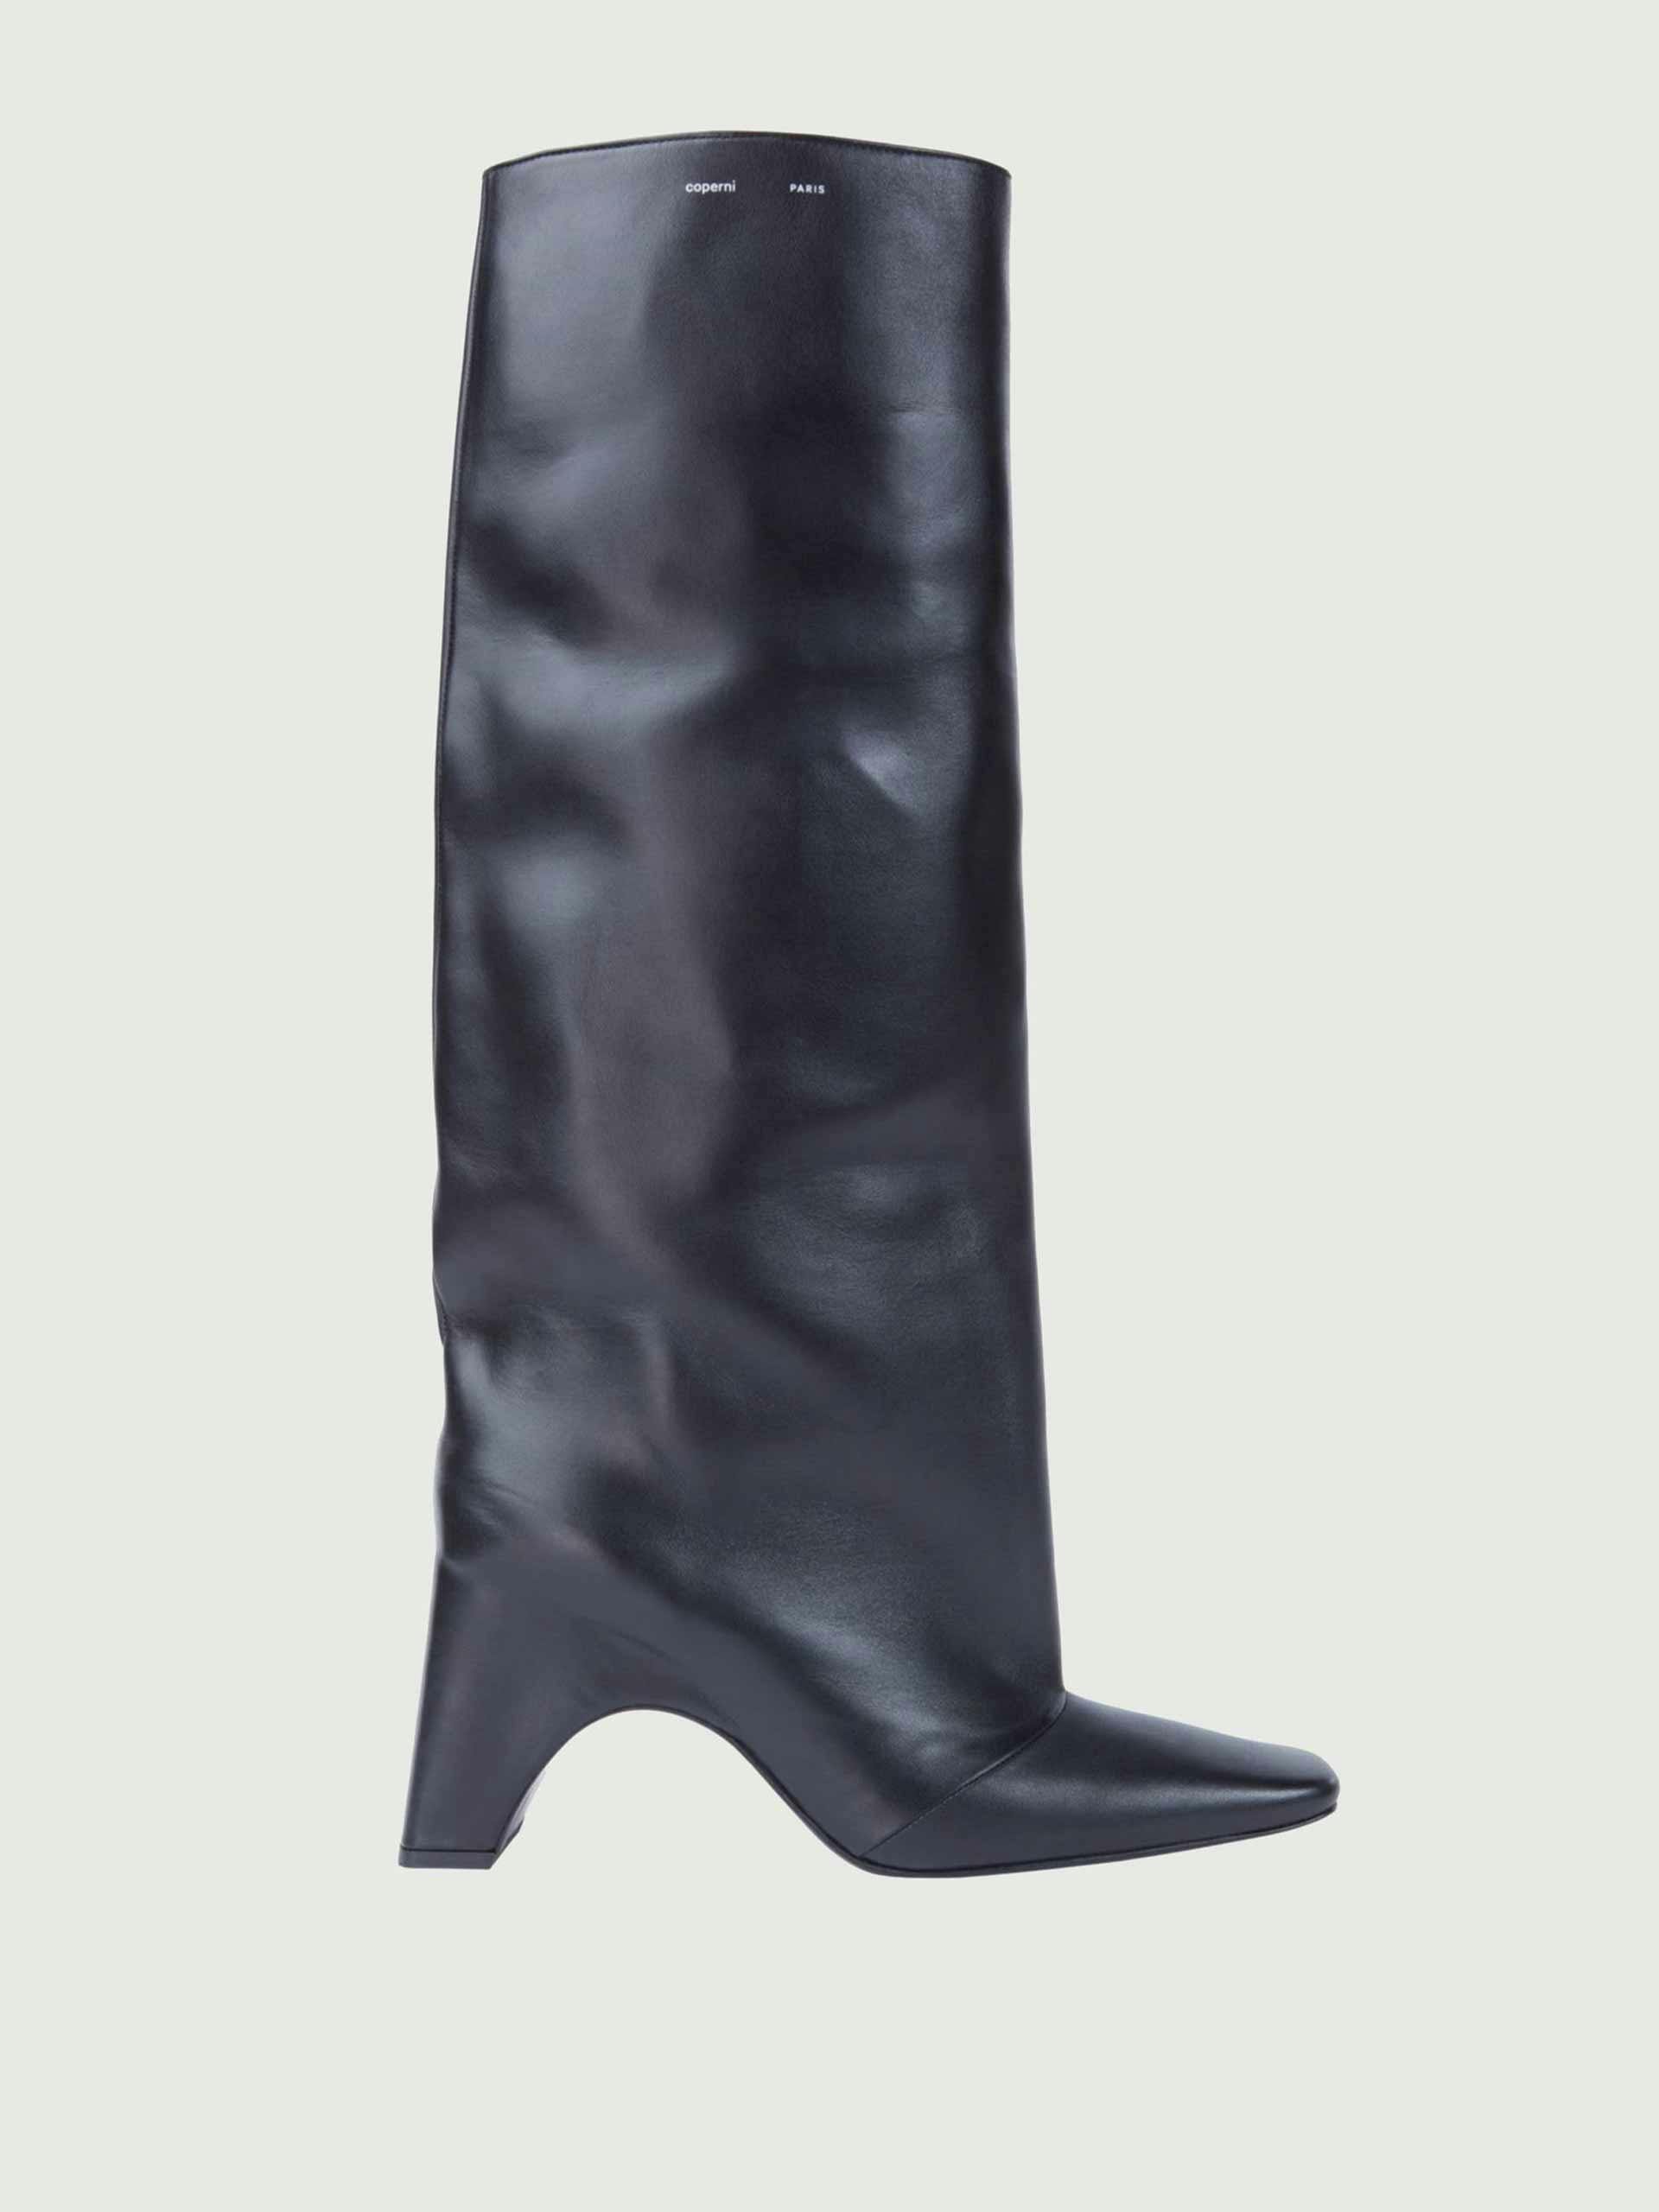 Knee high boots in black